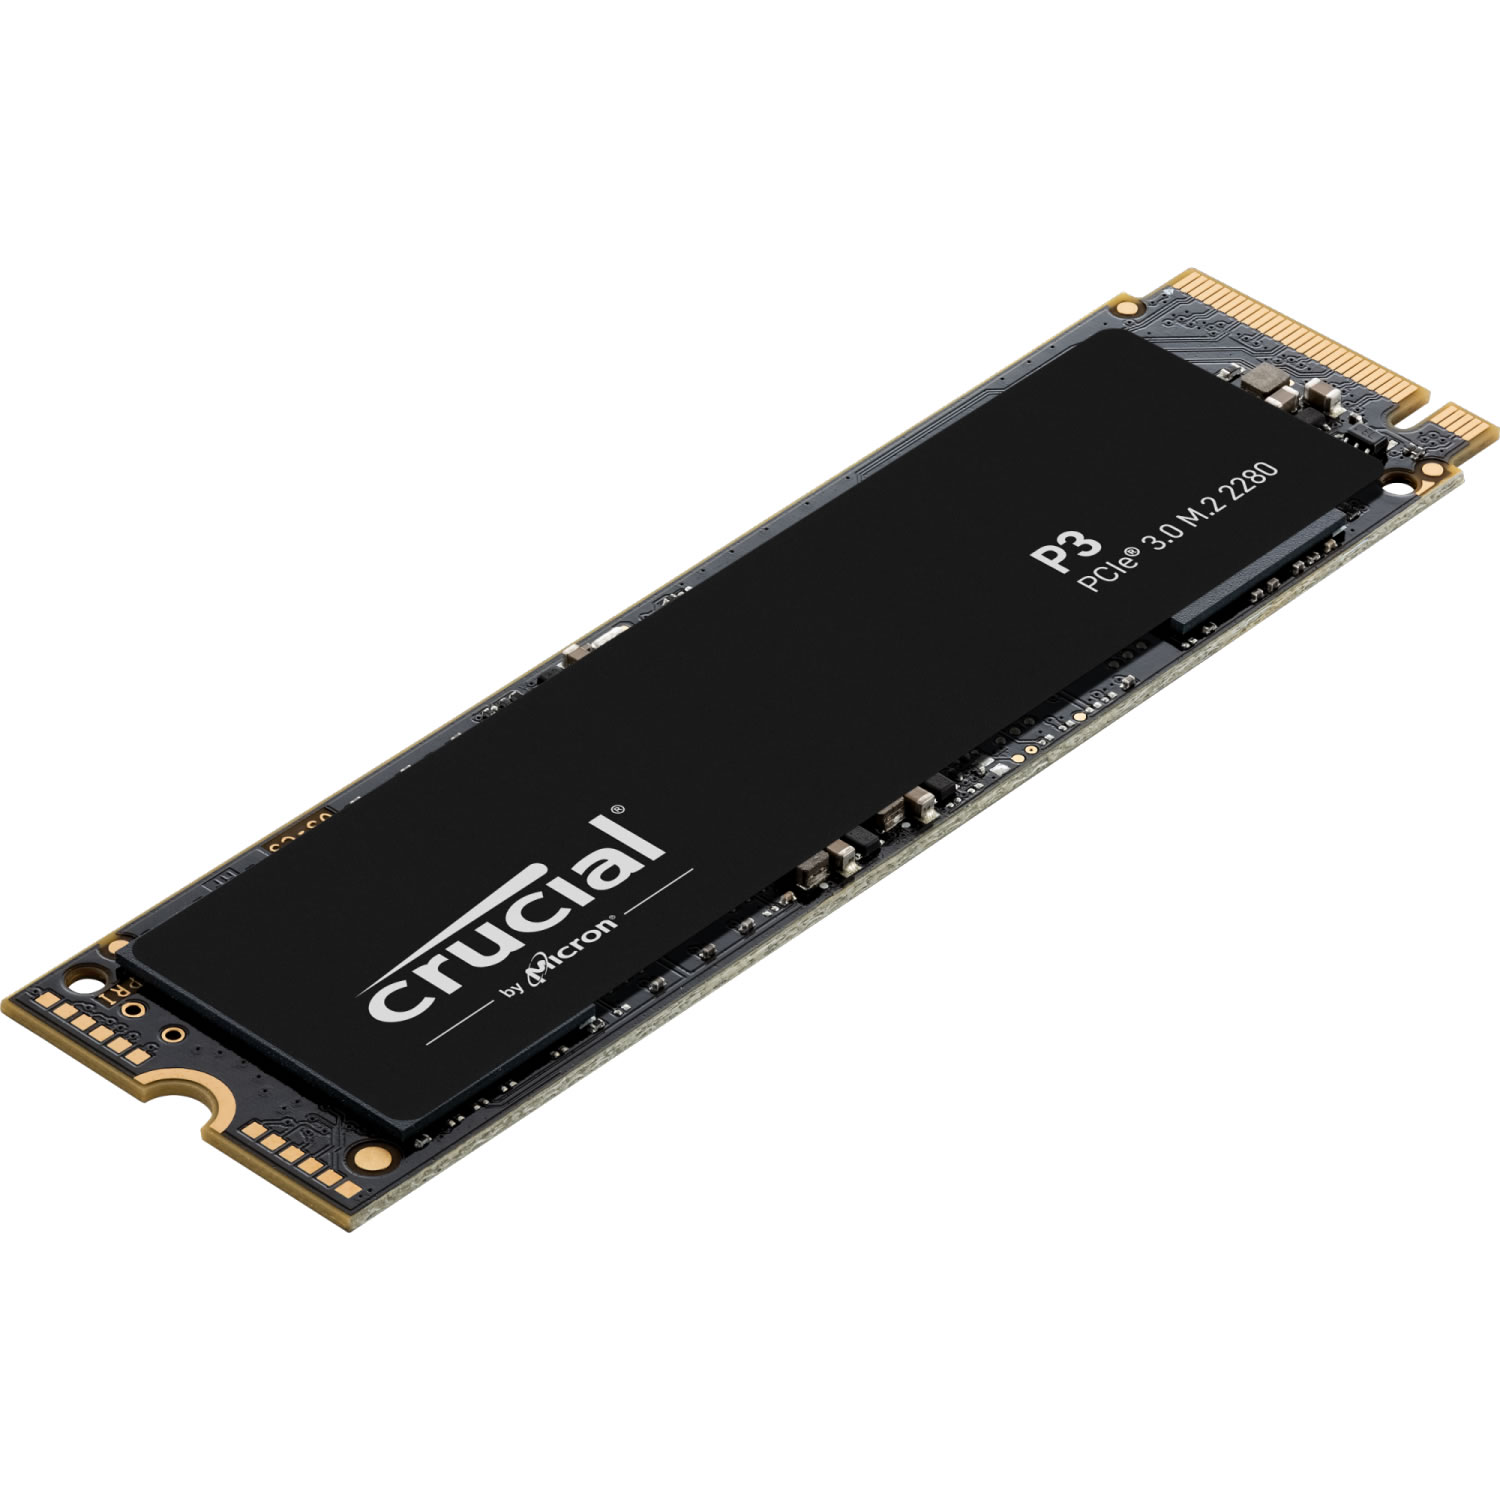 Crucial P3 2TB M.2 2280 PCI-e 3.0 NVMe Solid State Drive